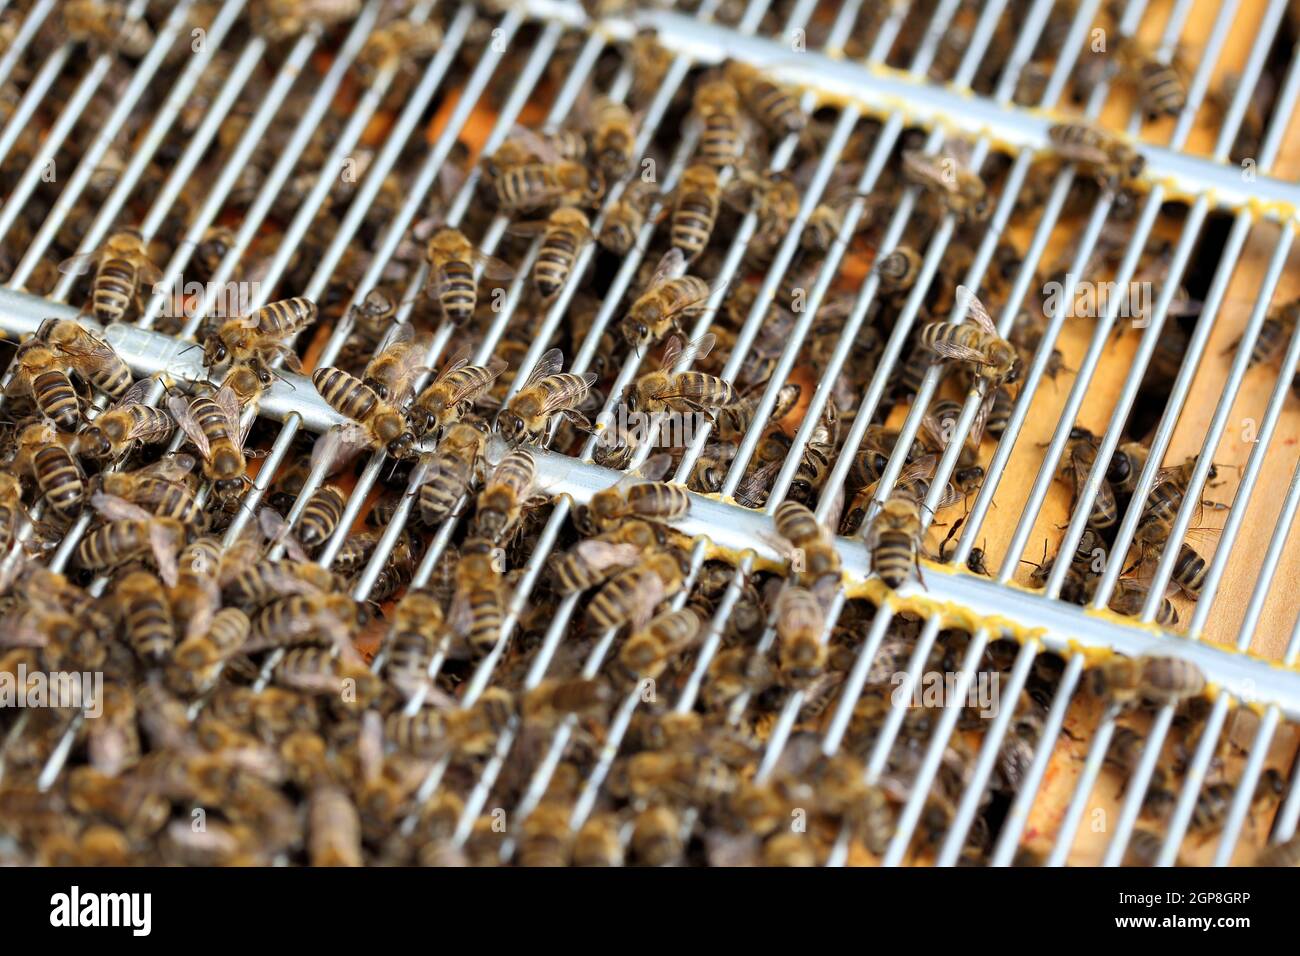 Close up view of the working bees on honey cells. Stock Photo